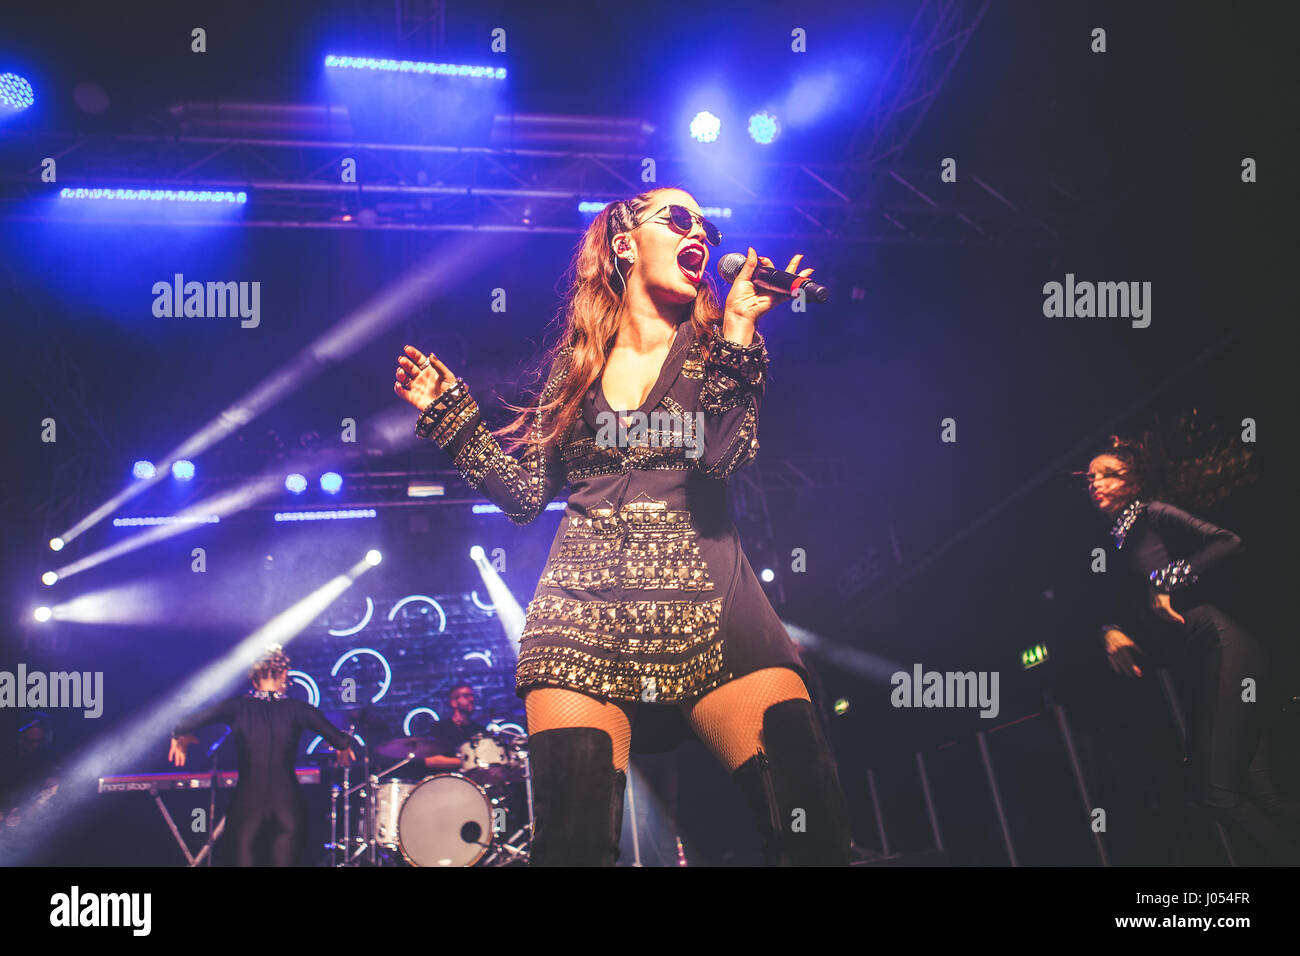 Argentine actress, singer, dancer, model, and songwriter Lali performs live at Magazzini Generali Stock Photo